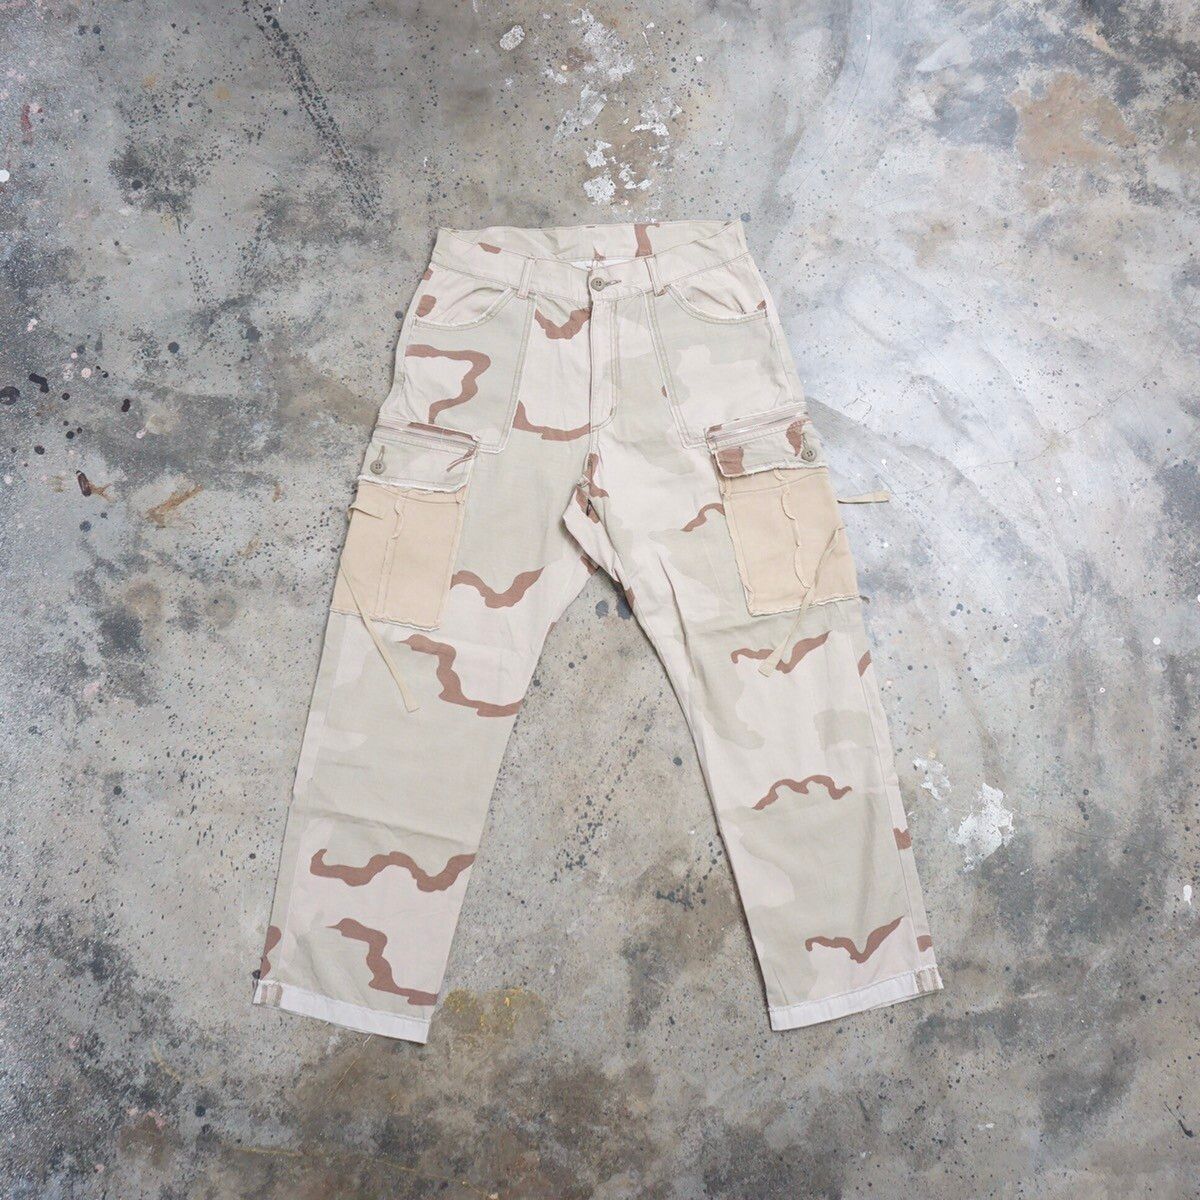 Post Overalls Camo tactical Cargo Pant Size US 33 - 1 Preview